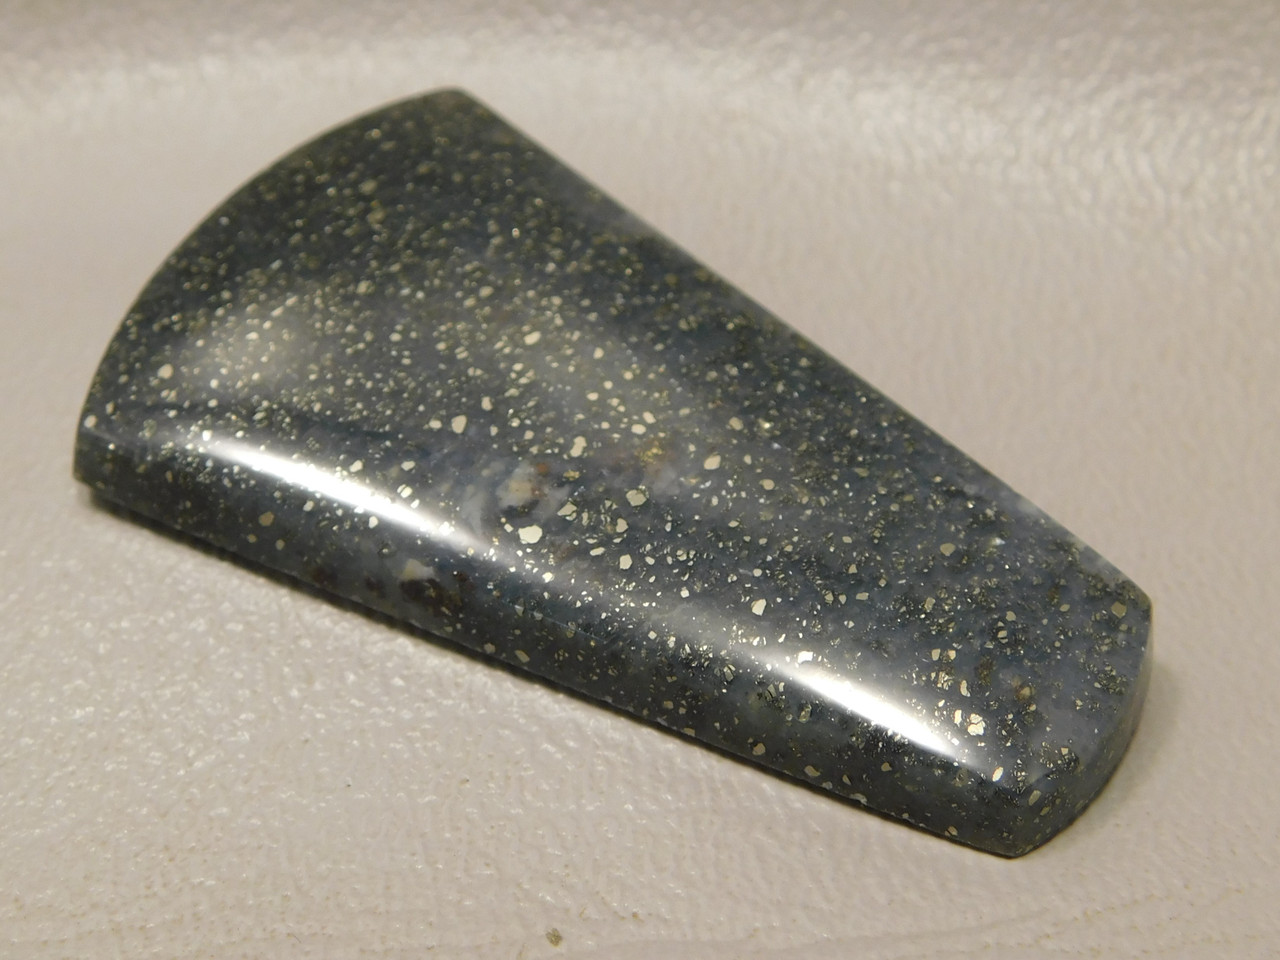 Sparkling Pyrite in Agate Cabochon Jewelry Making Supplies #5